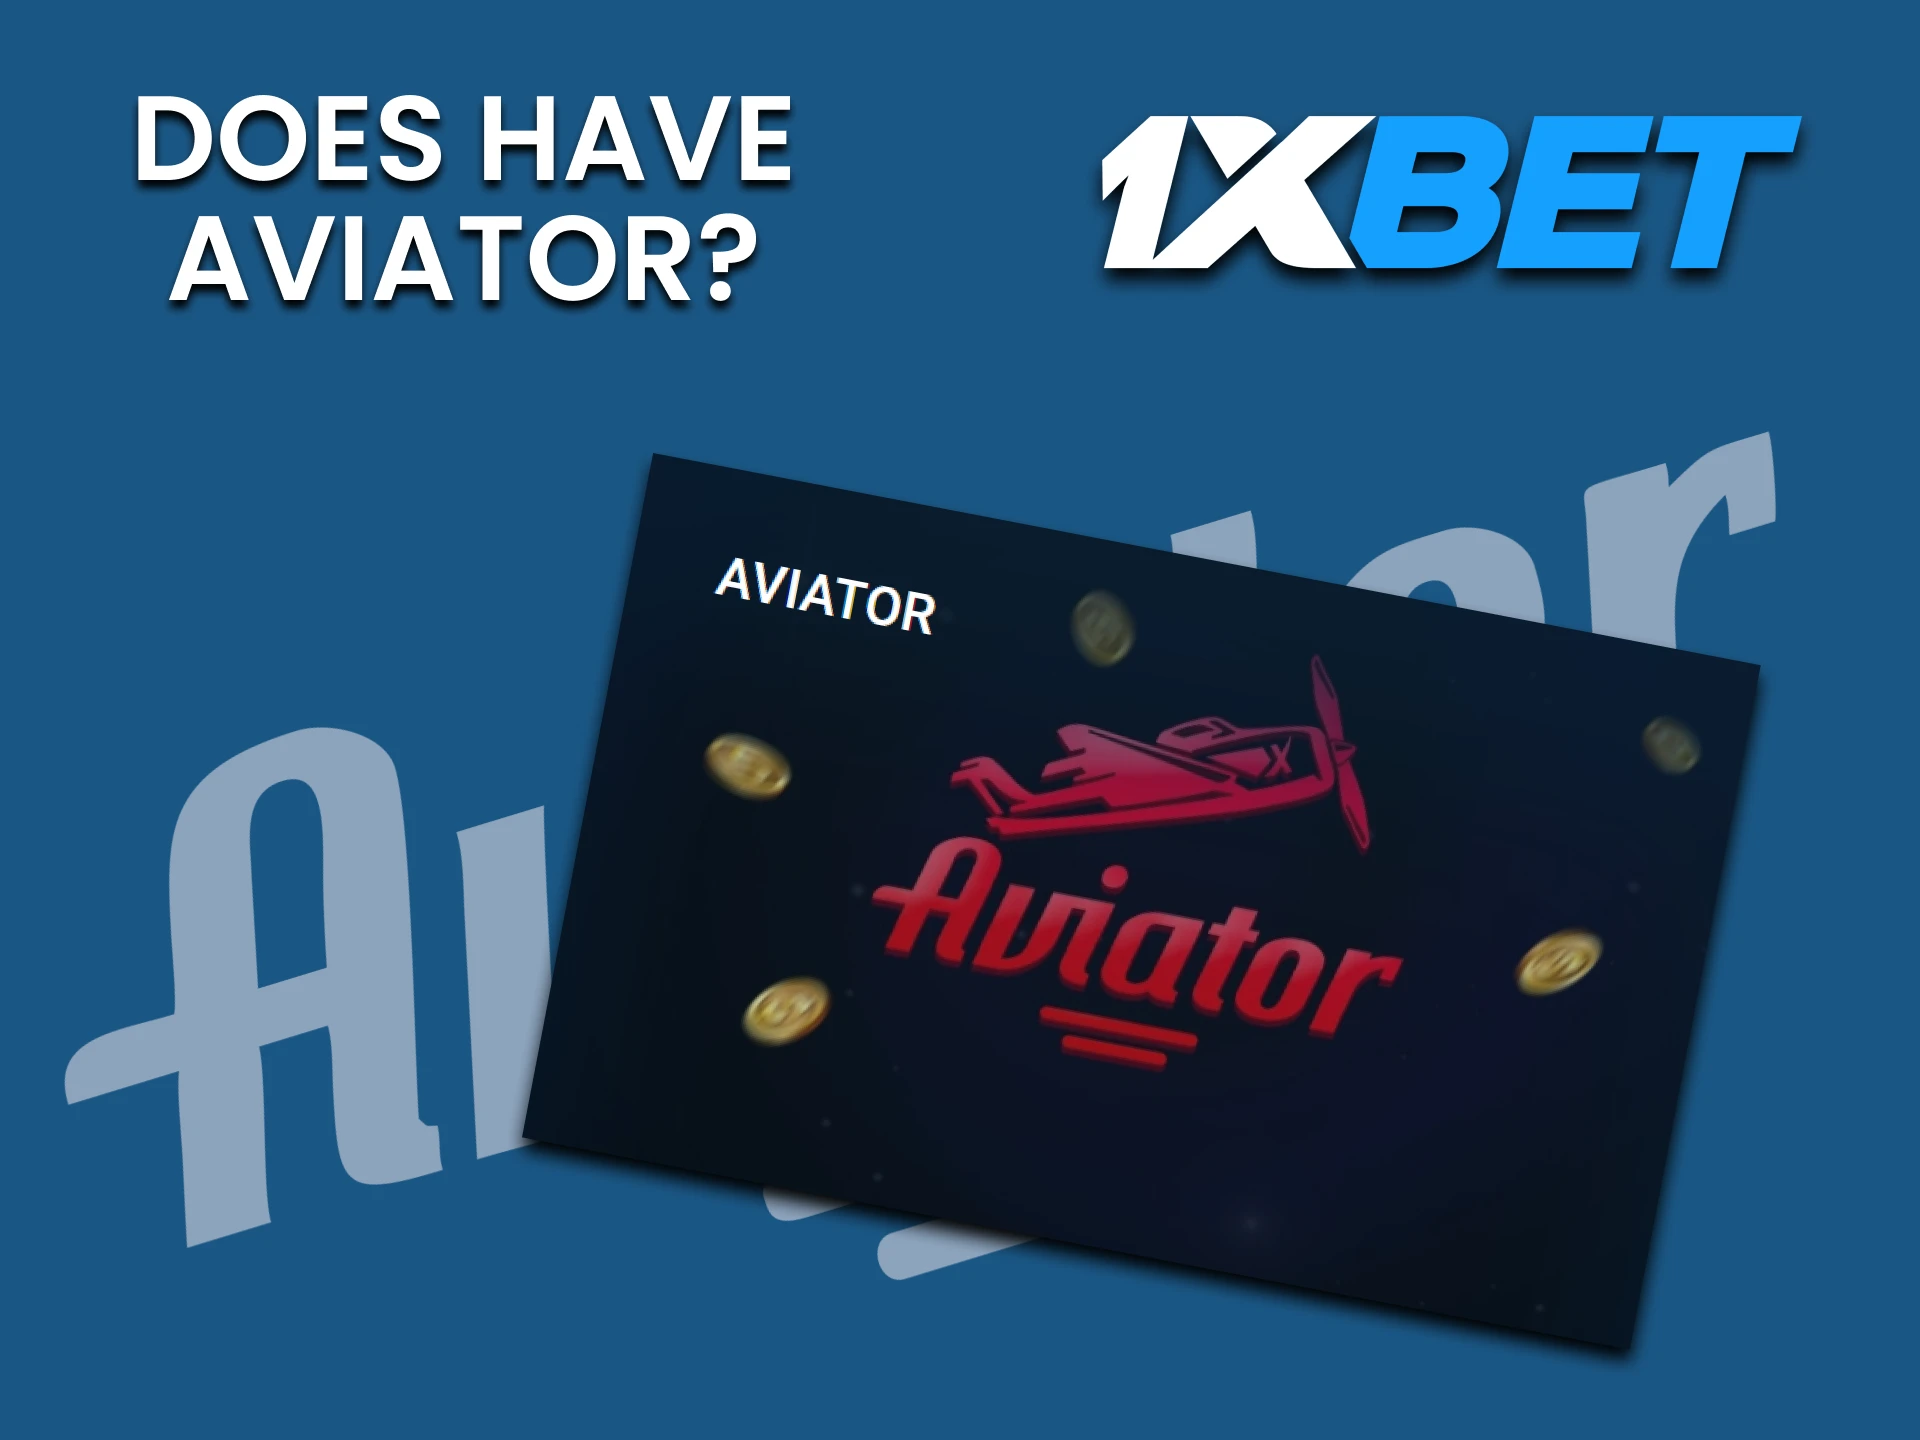 The Aviator game is on the 1xbet website in the crash section.